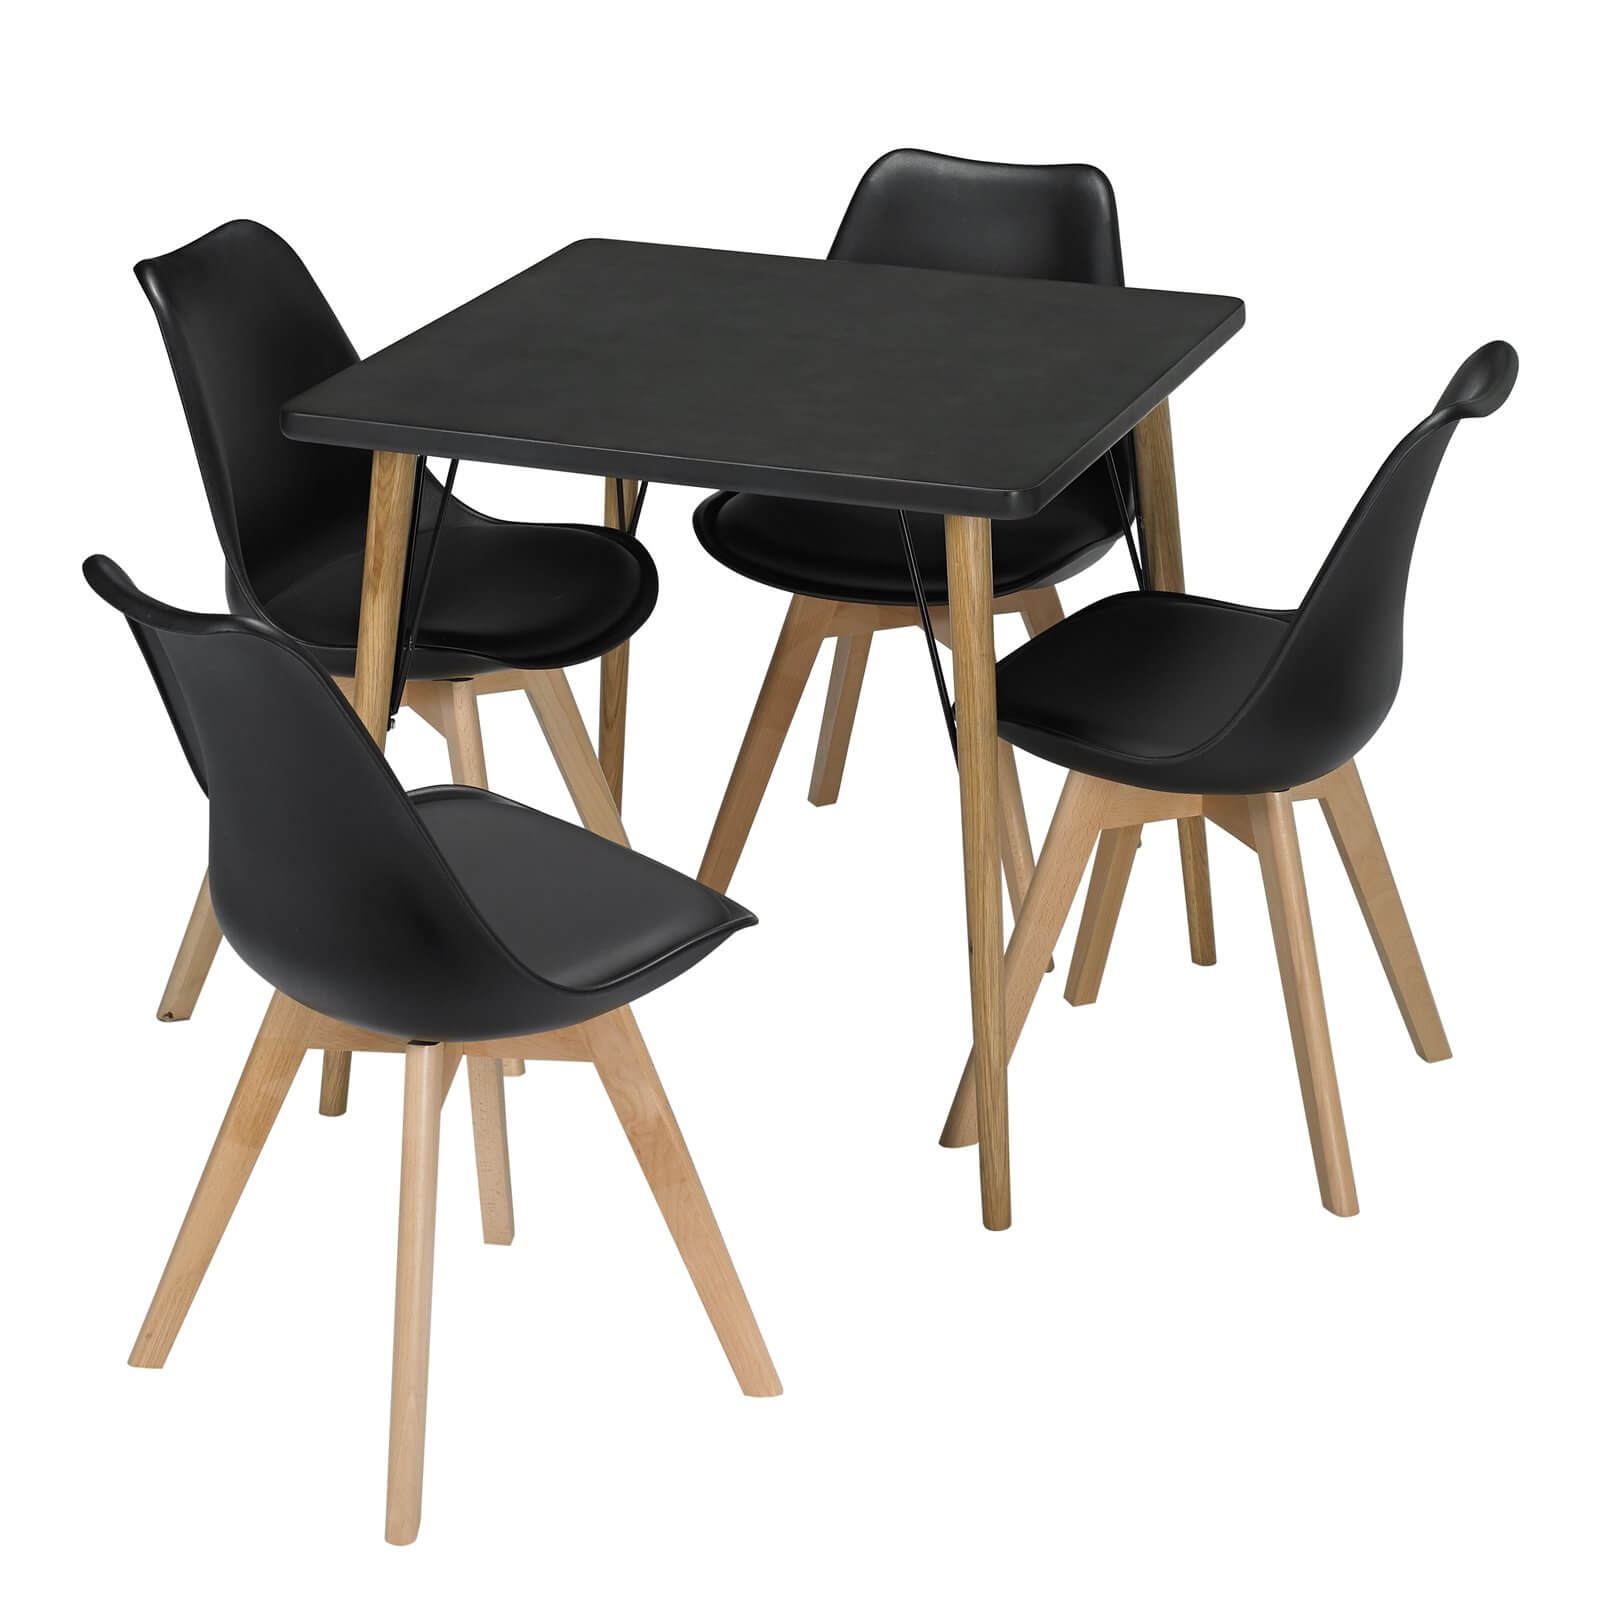 Mercer 4 Seater Dining Set - Louvre Dining Chairs - Black